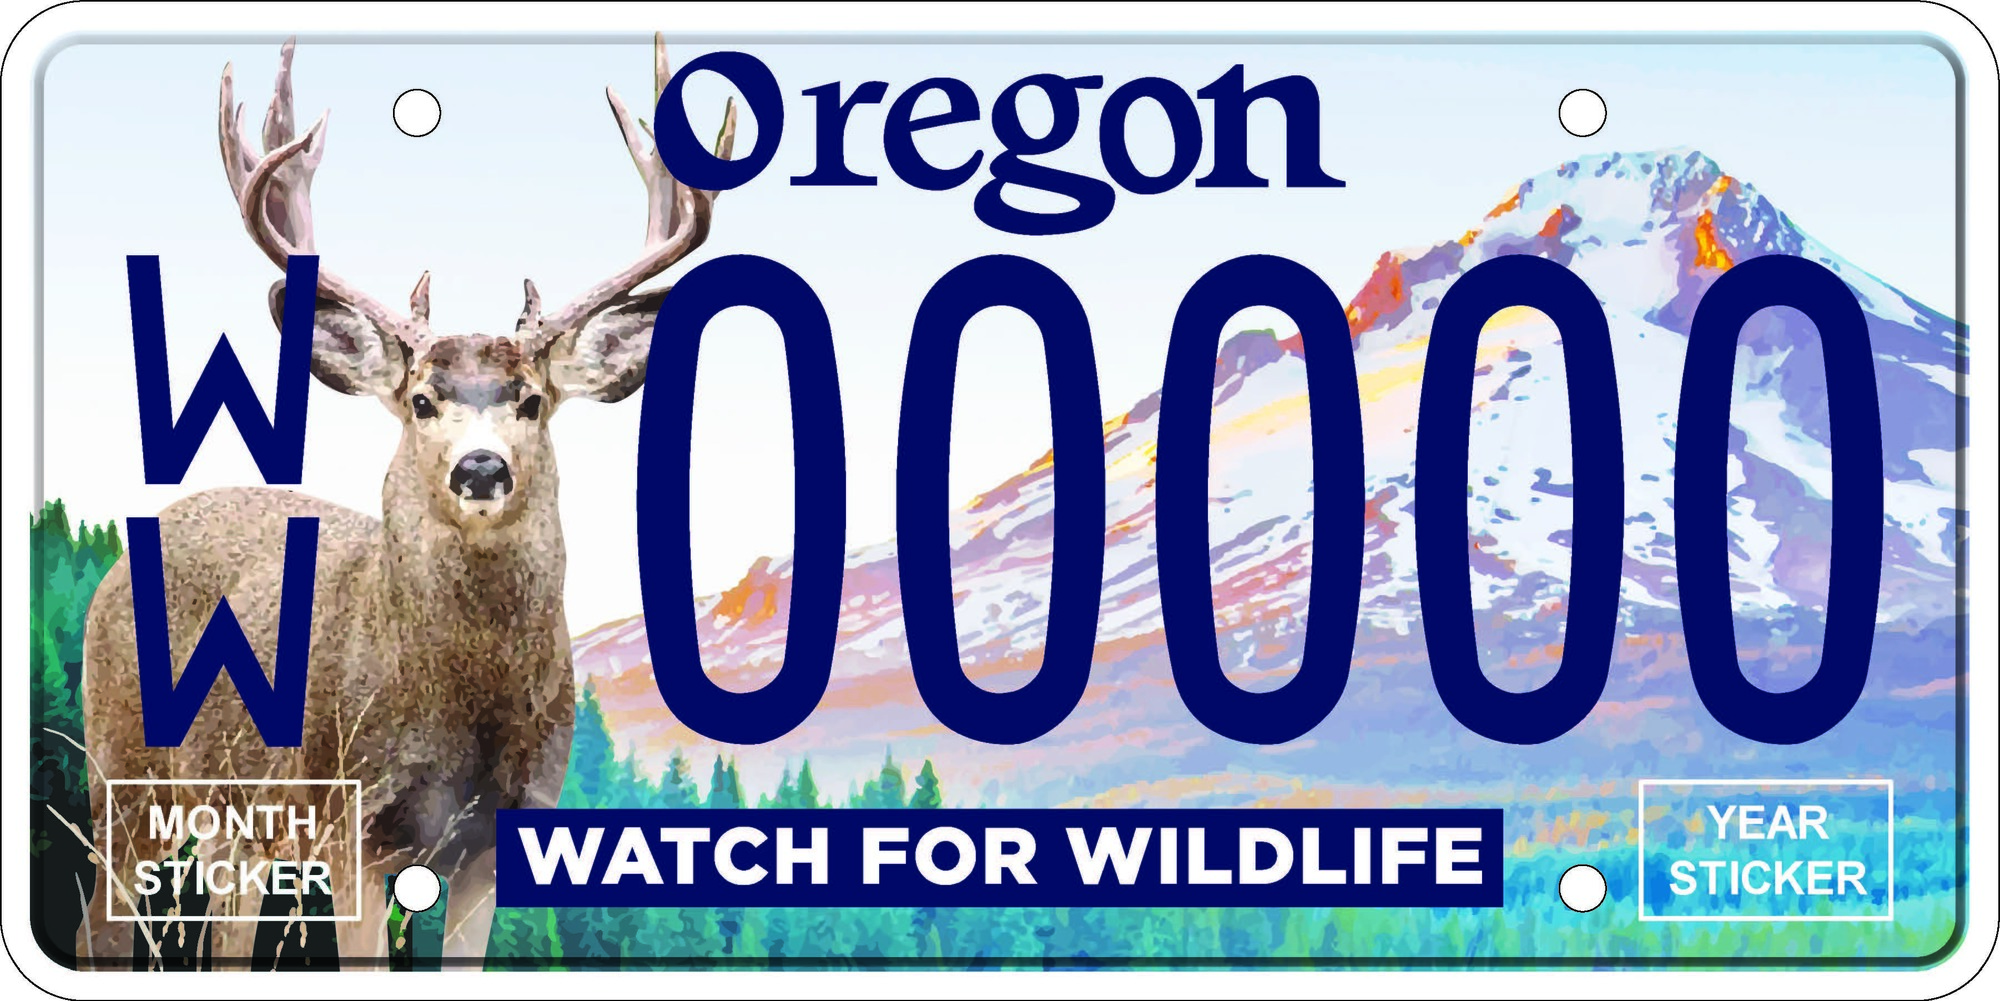 Image of Watch for Wildlife plate showing deer and mountain